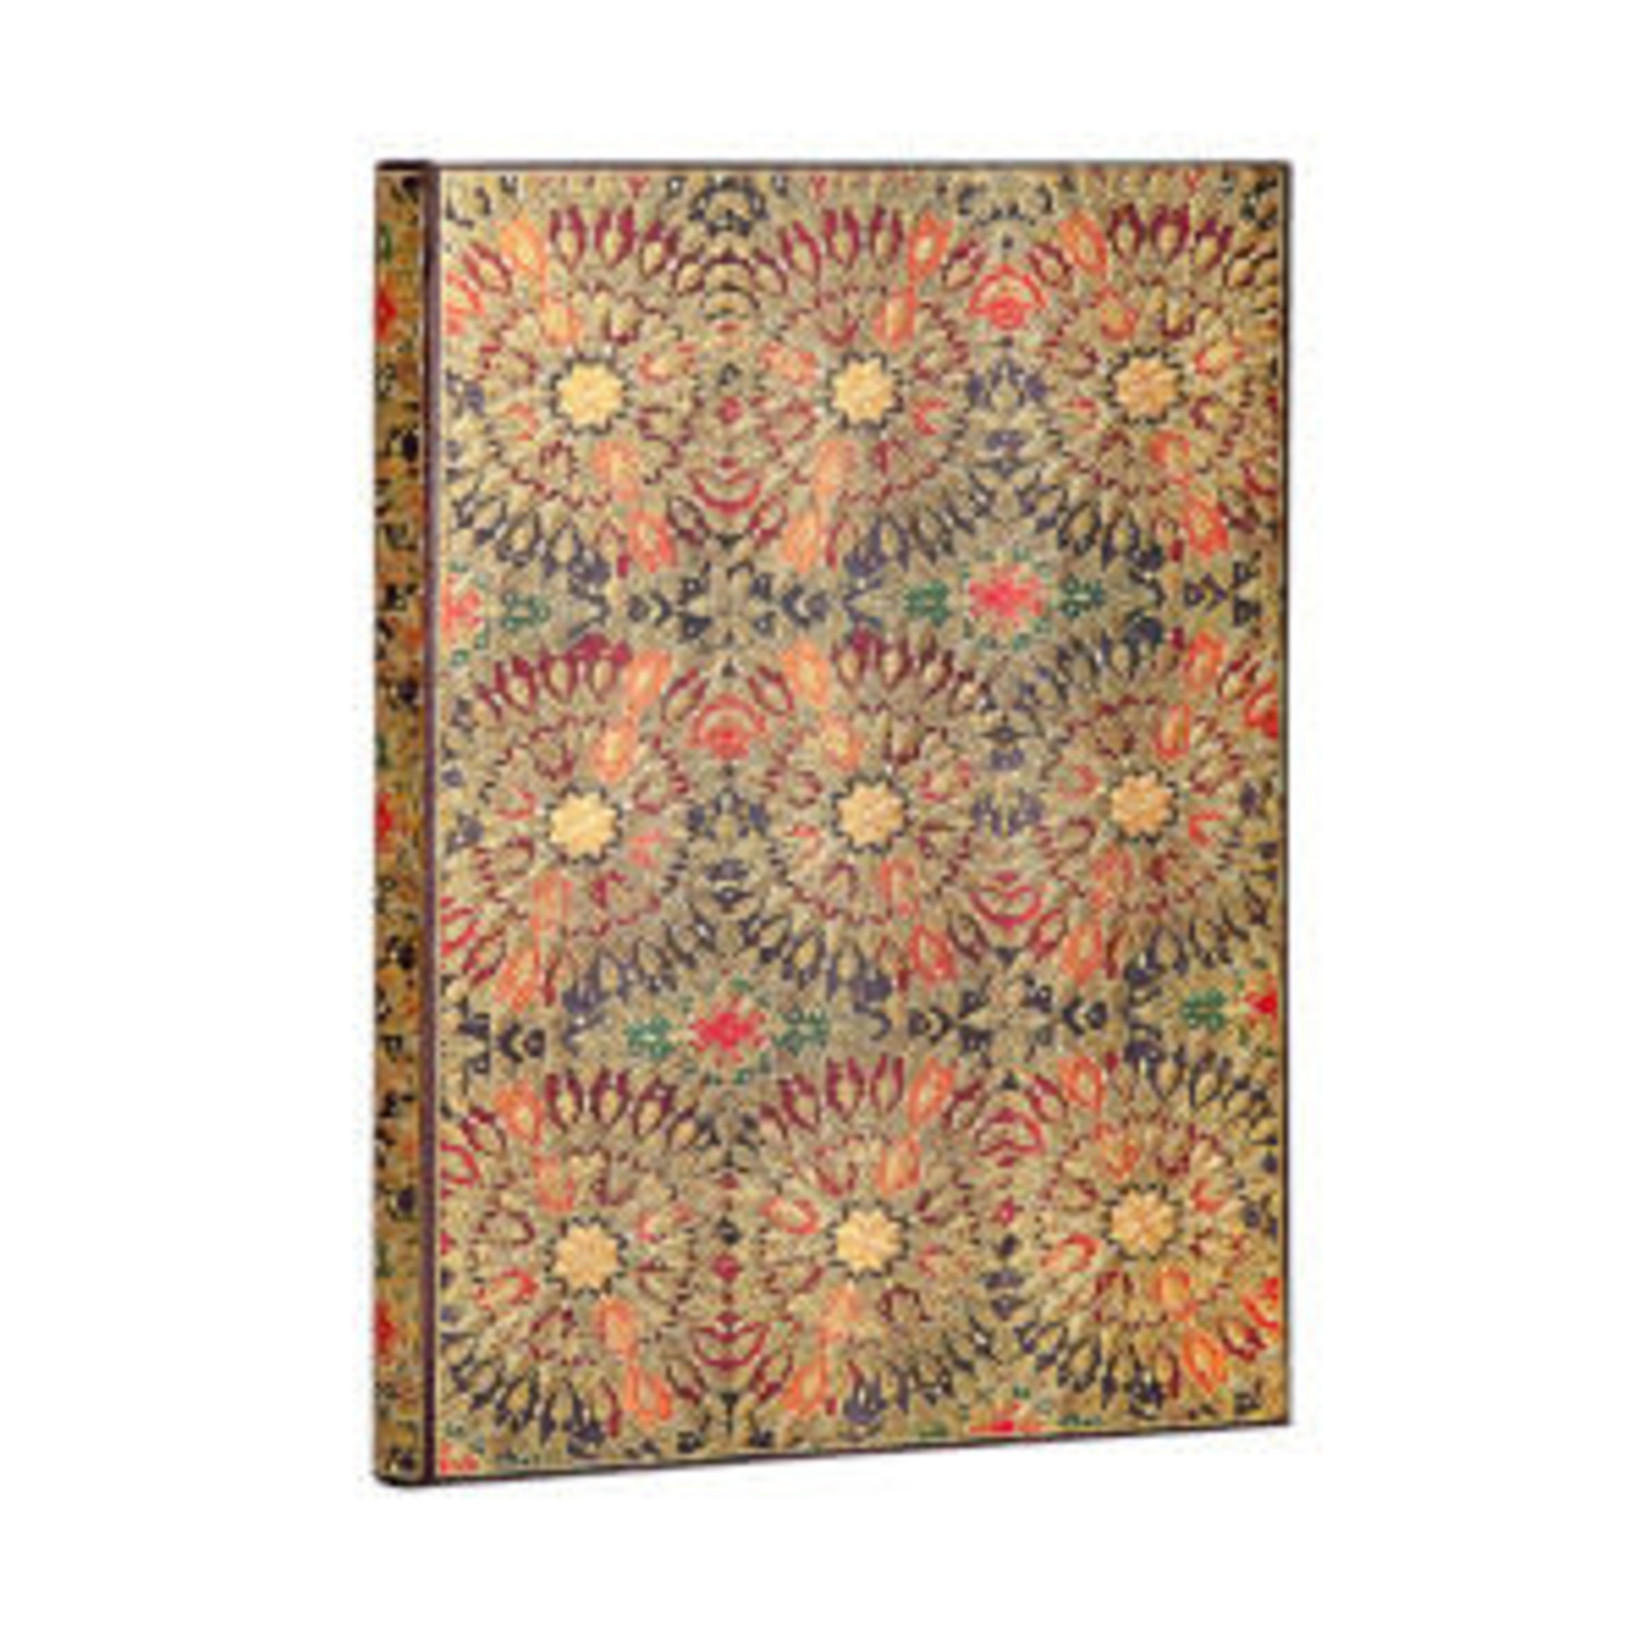 Paperblanks Journals Fire Flowers